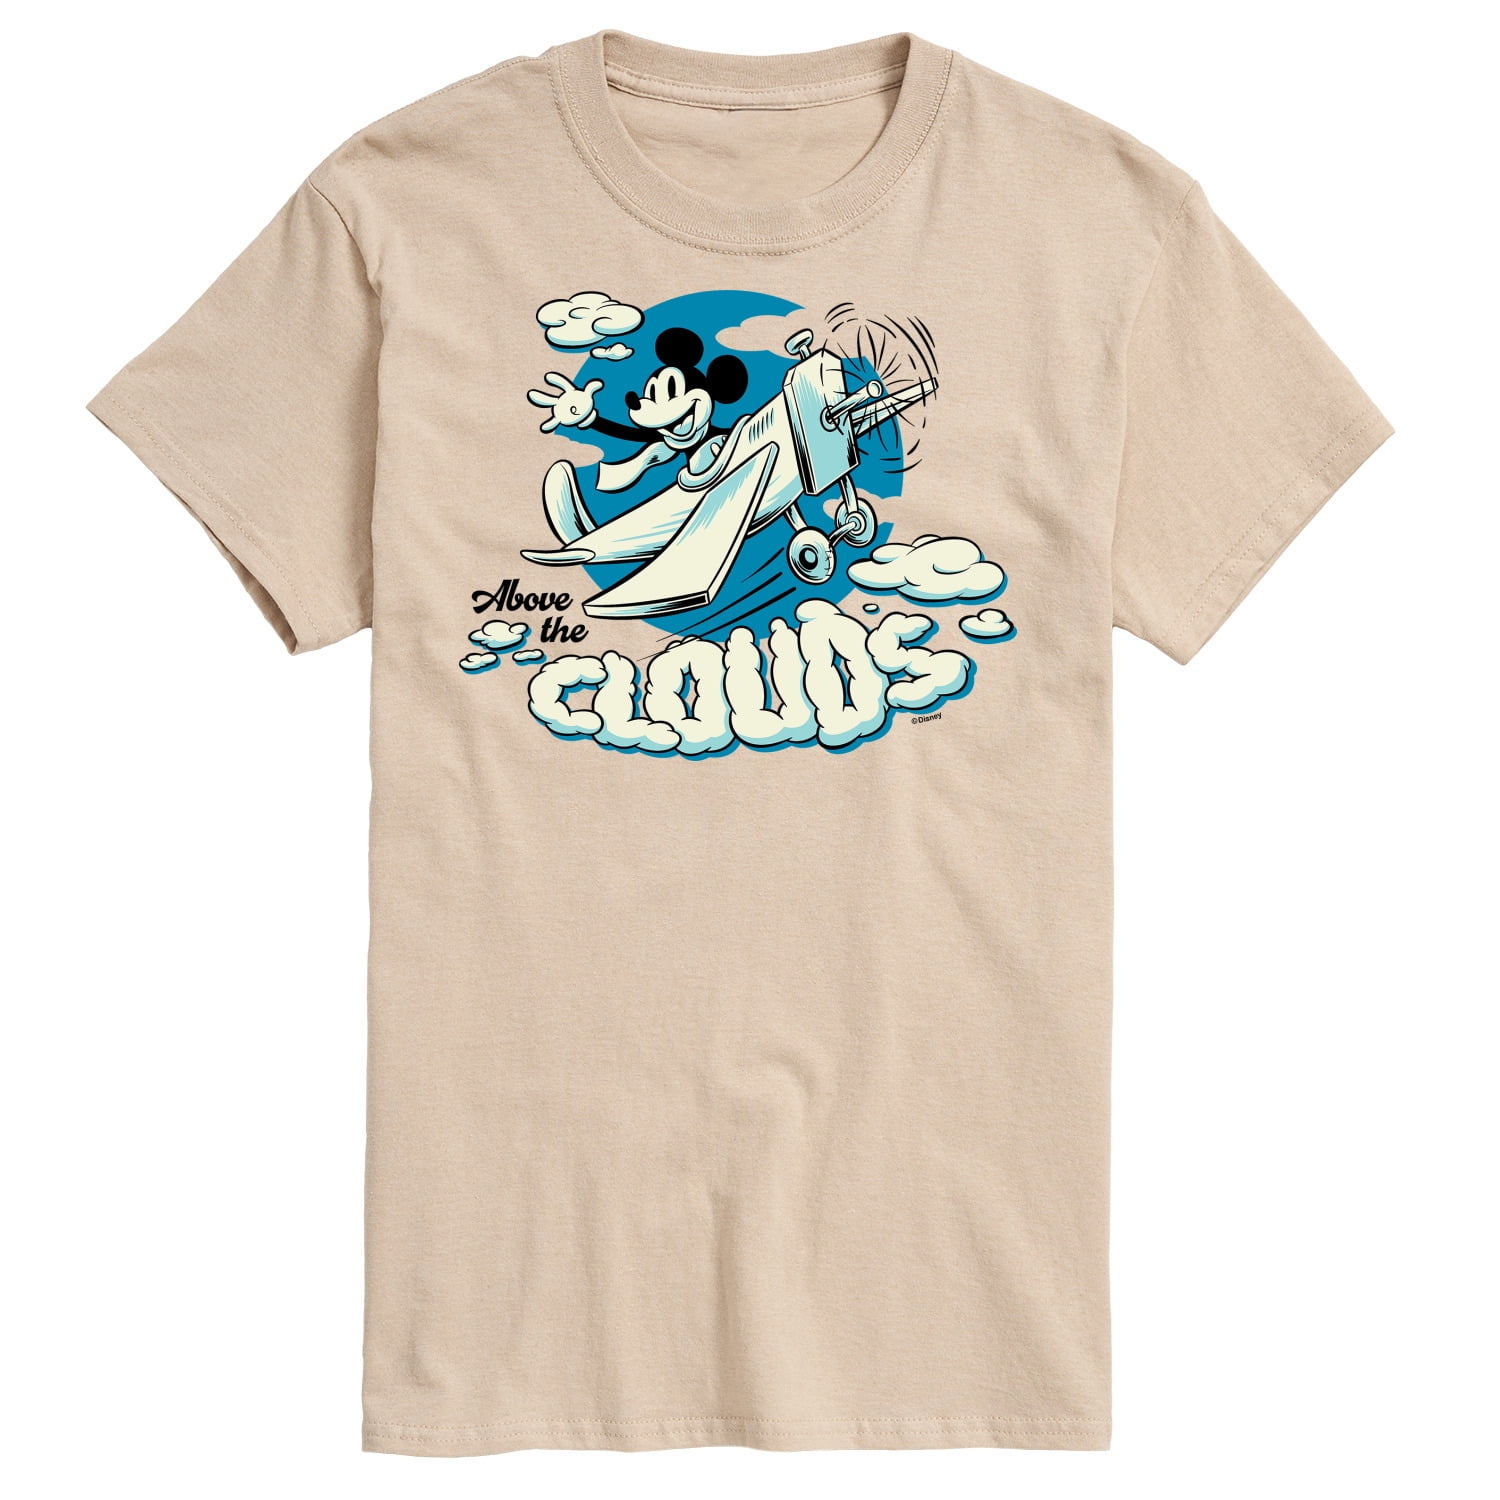 Mickey & Friends - Above The Clouds - Men's Short Sleeve Graphic T-Shirt 